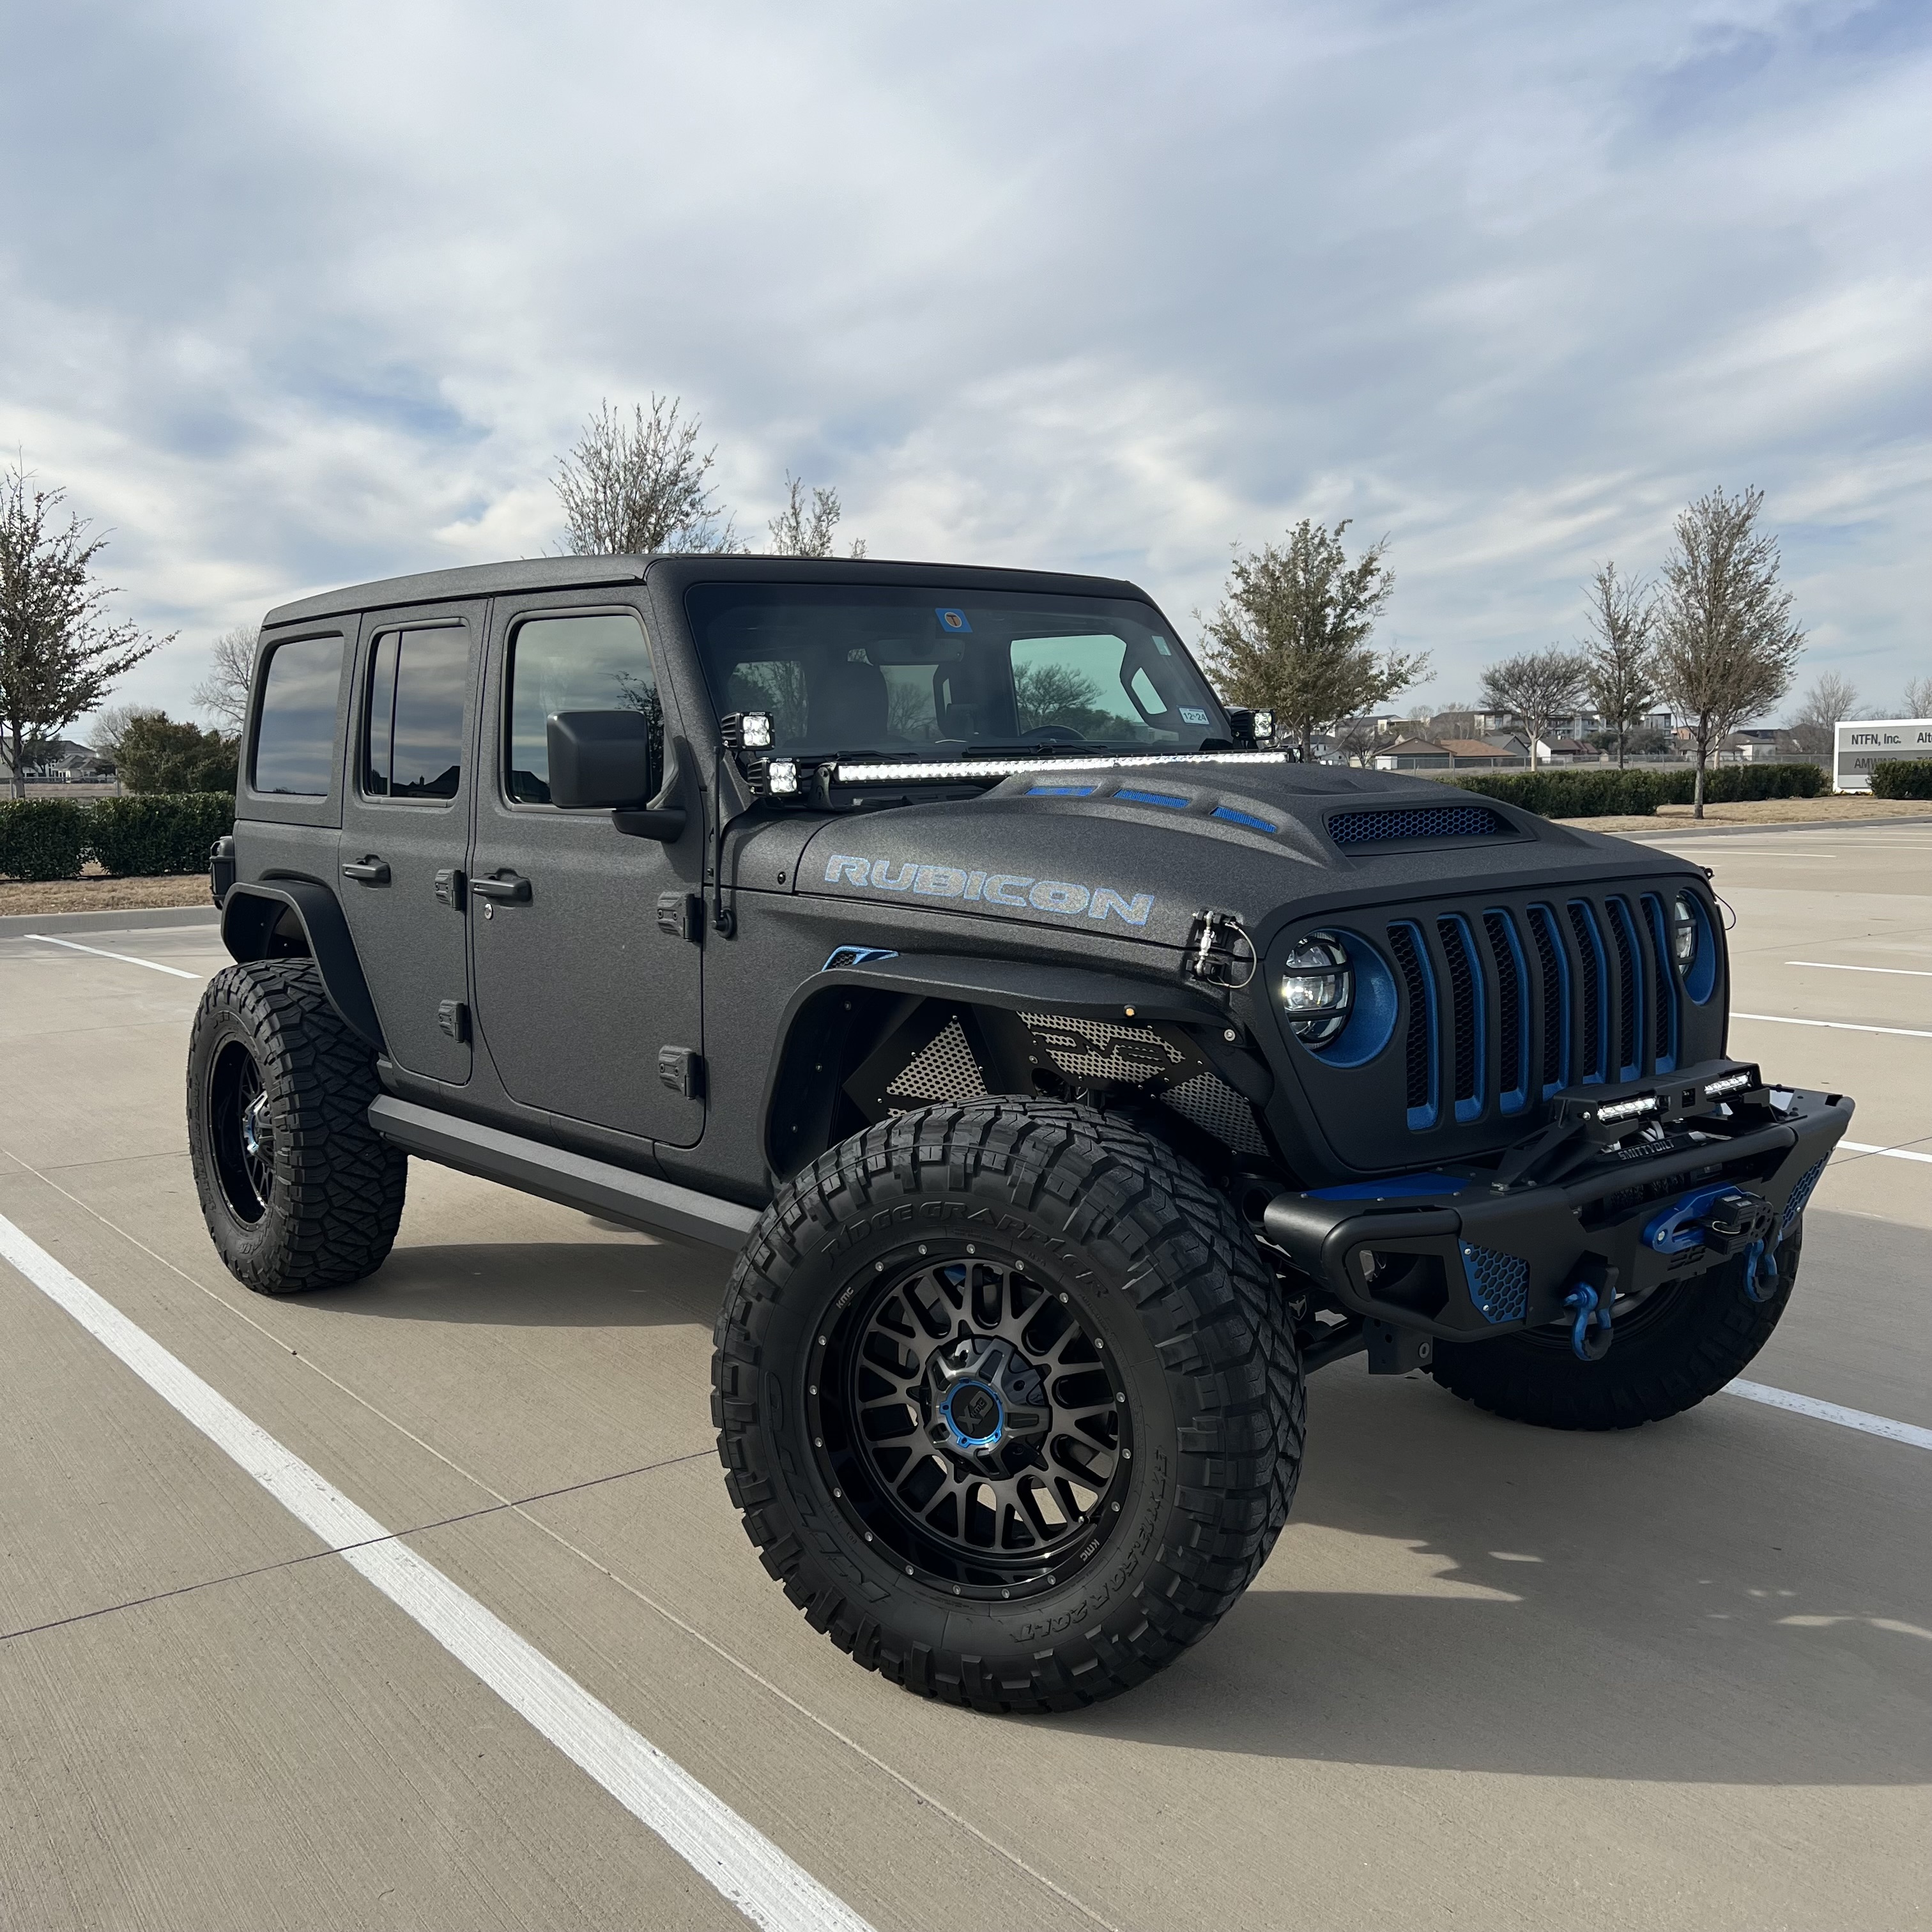 Jeep Wrangler Unlimited Rubicon used, fuel Hybrid and Automatic gearbox, 3  Km - 73.752 €